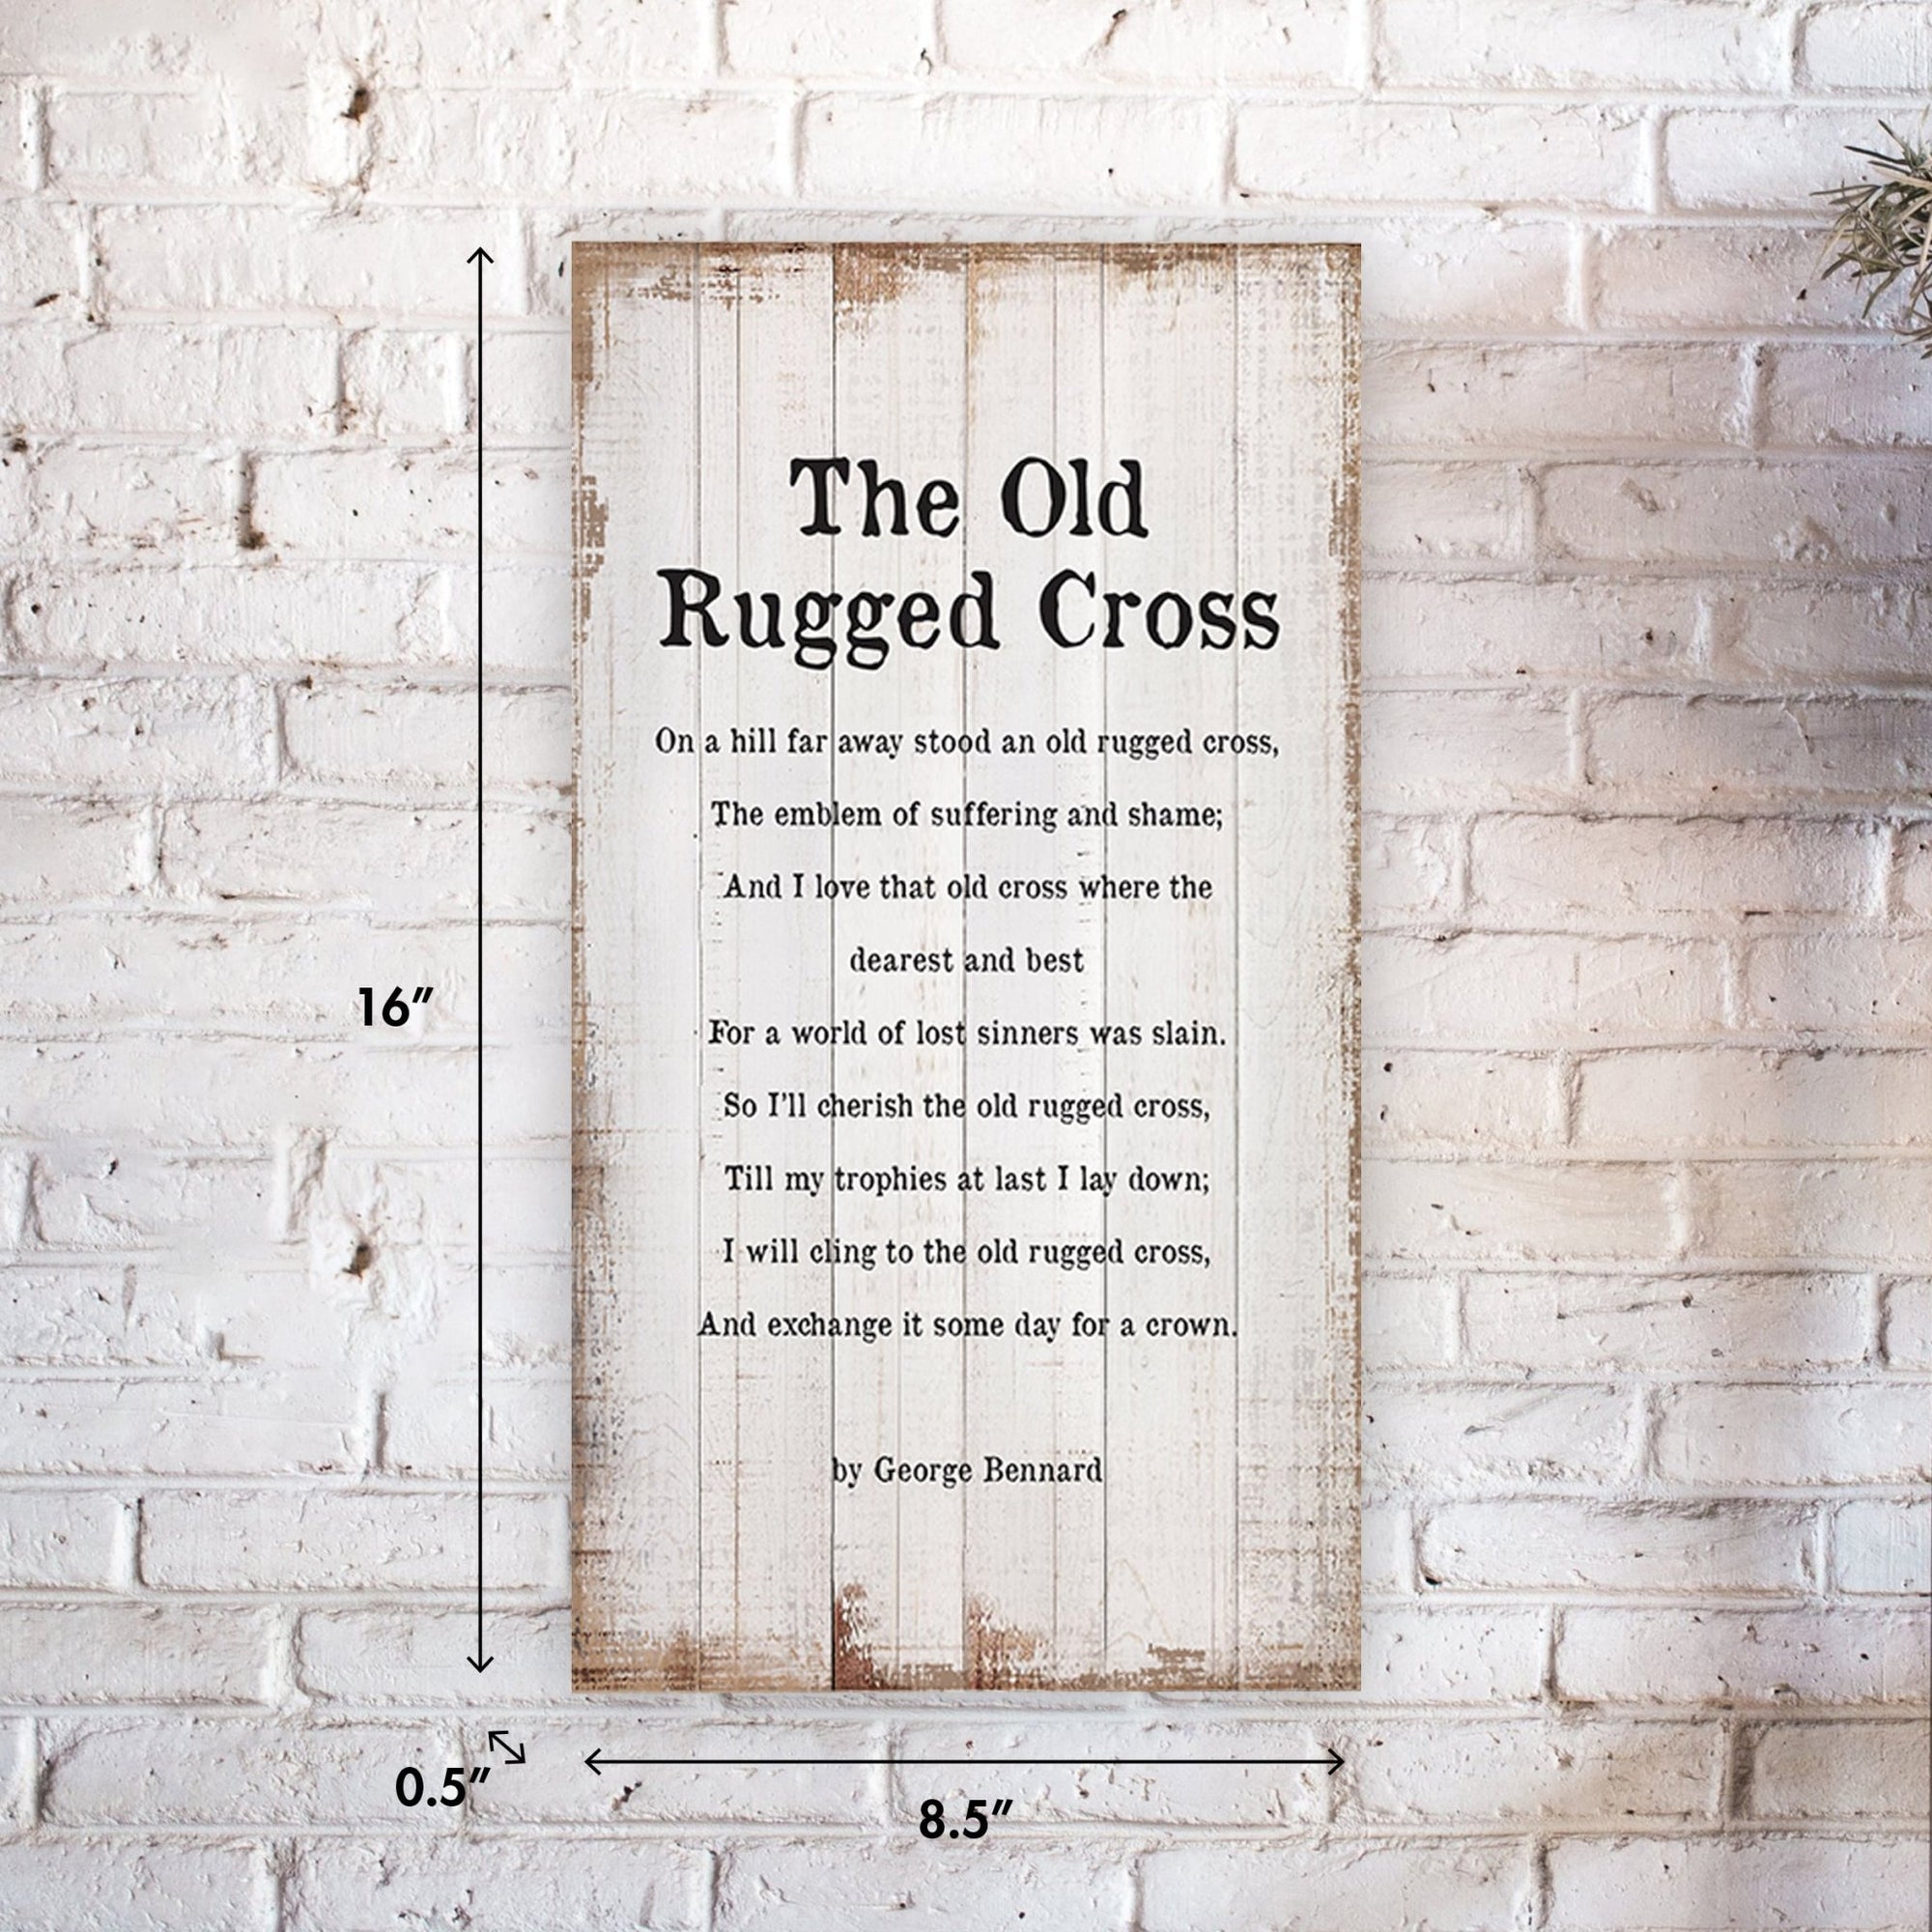 Vintage-Inspired Wooden Wall Hanging Plaque For Home, Offices, & Gift Ideas - The Old Rugged - LifeSong Milestones